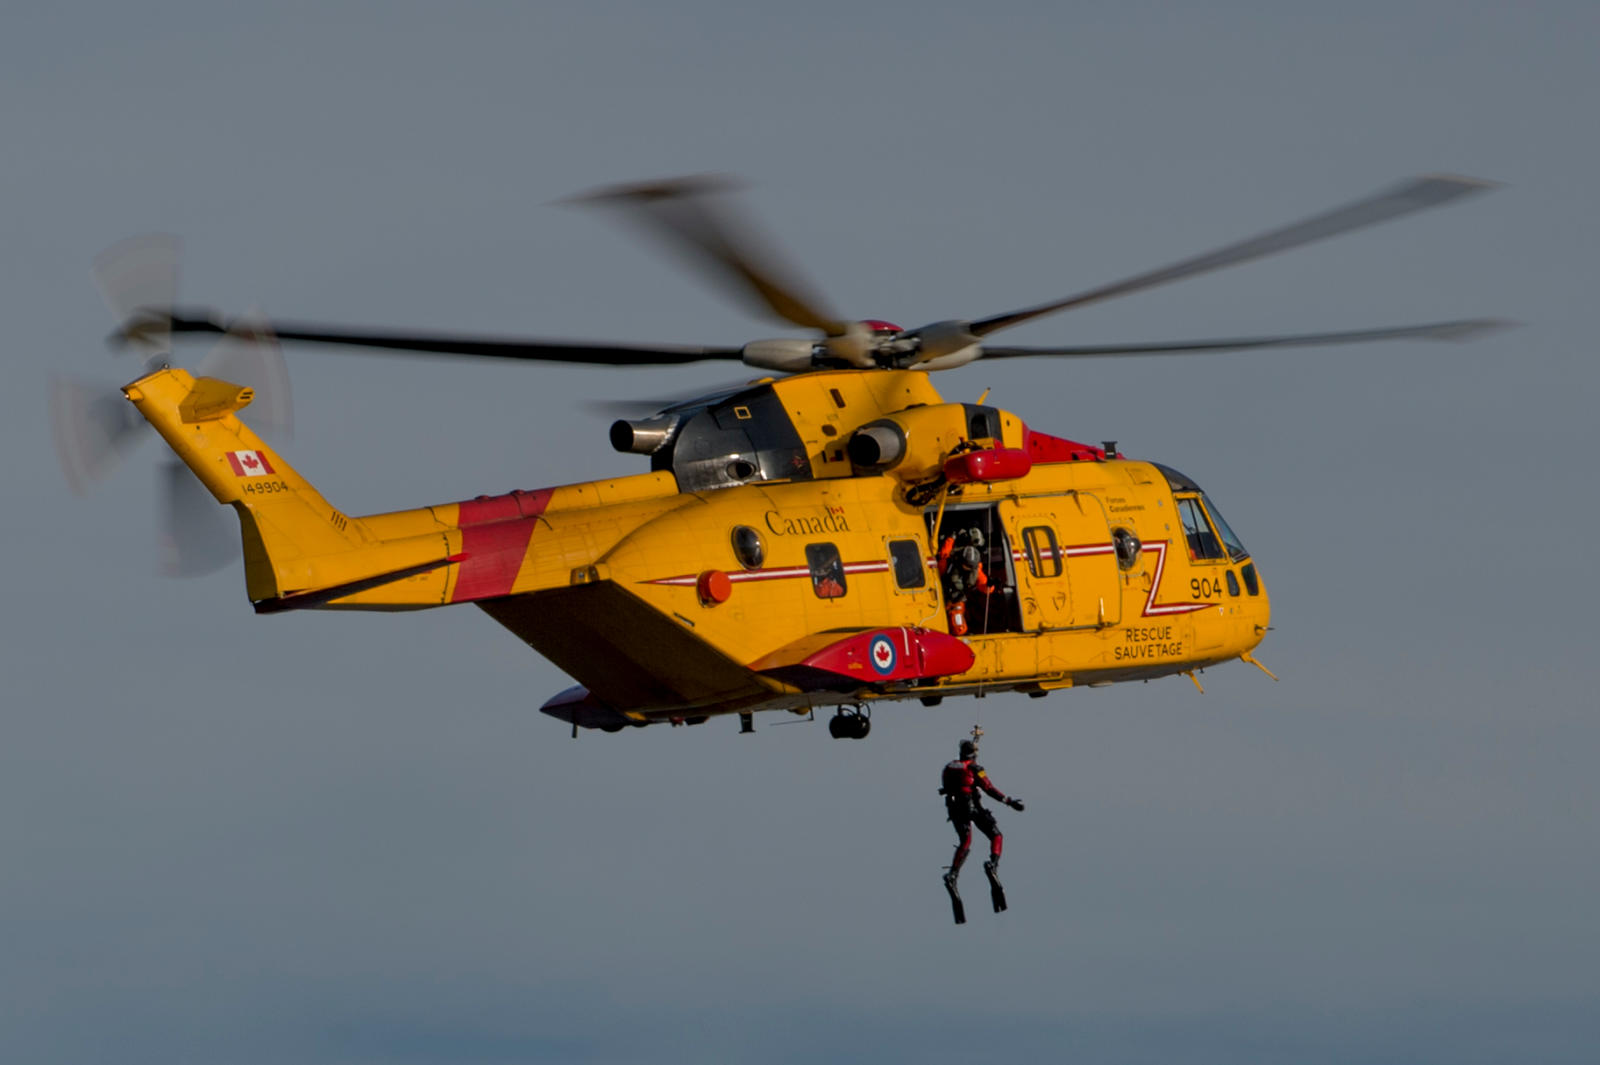 A CH-149 Cormorant helicopter hoists a Search and Rescue Technician during the National Search and Rescue Exercise (SAREX 2016) in Yellowknife, Northwest Territories on September 21, 2016.Photo: MCpl Pat Blanchard, Canadian Forces Combat CameraIS03-2016-0035-007~Un technicien en recherche et sauvetage est hissé à bord dun hélicoptère CH-149 Cormorant au cours de lexercice national de recherche et sauvetage (SAREX 2016), à Yellowknife, aux Territoires du Nord Ouest, le 21 septembre 2016. Photo : Cplc Pat Blanchard, Caméra de combat des Forces canadiennesIS03-2016-0035-007